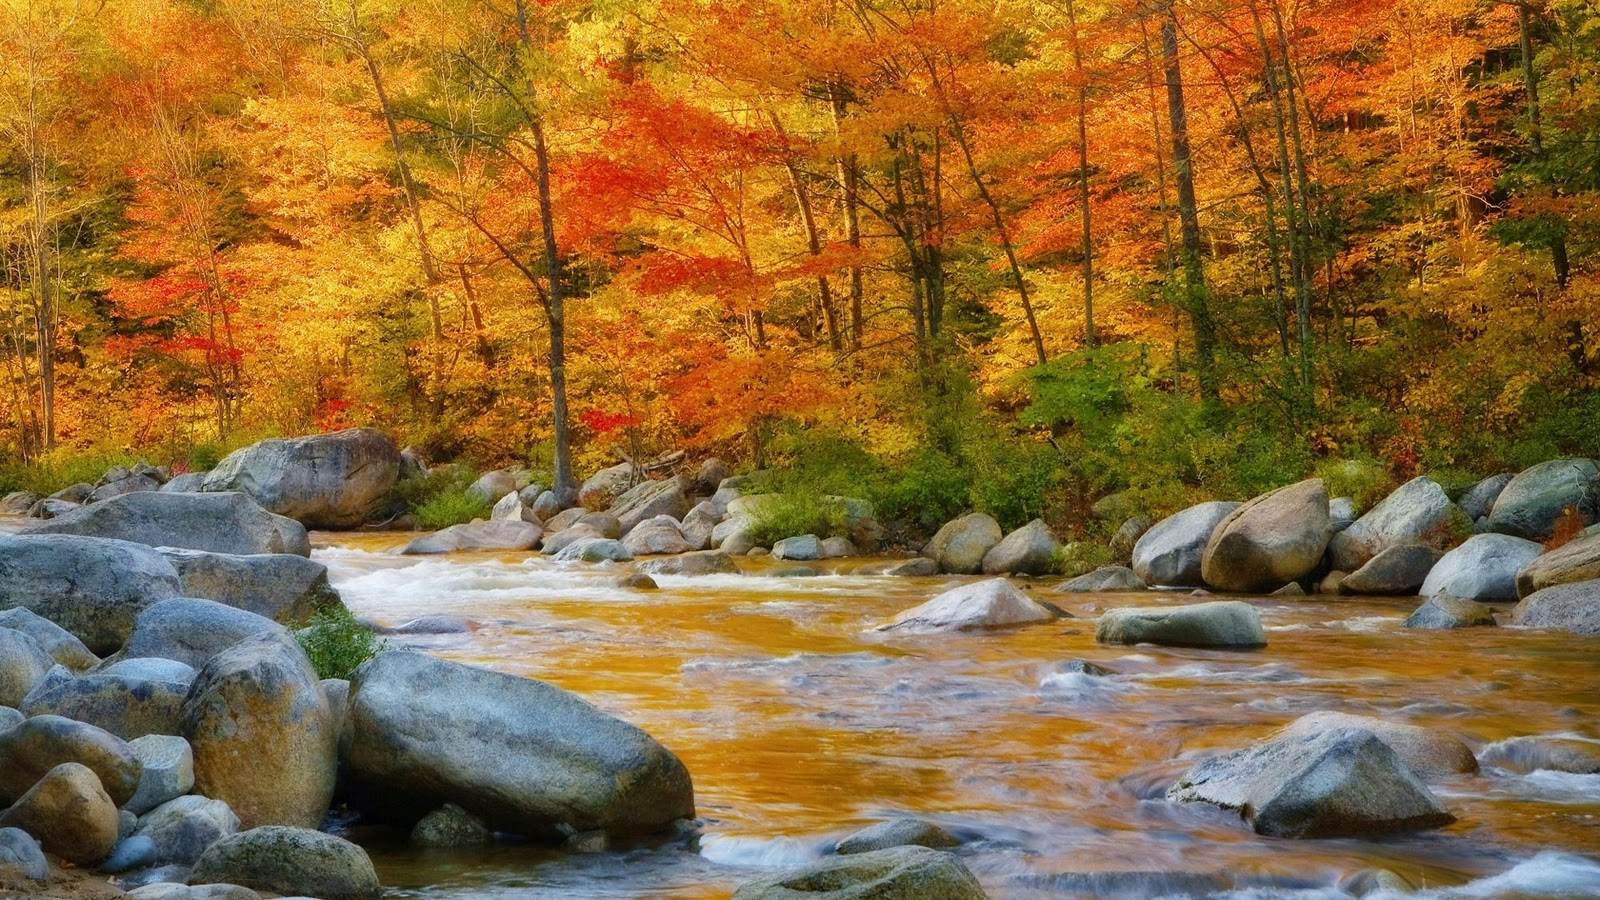 autumn picture wallpaper download river with rocks photos download